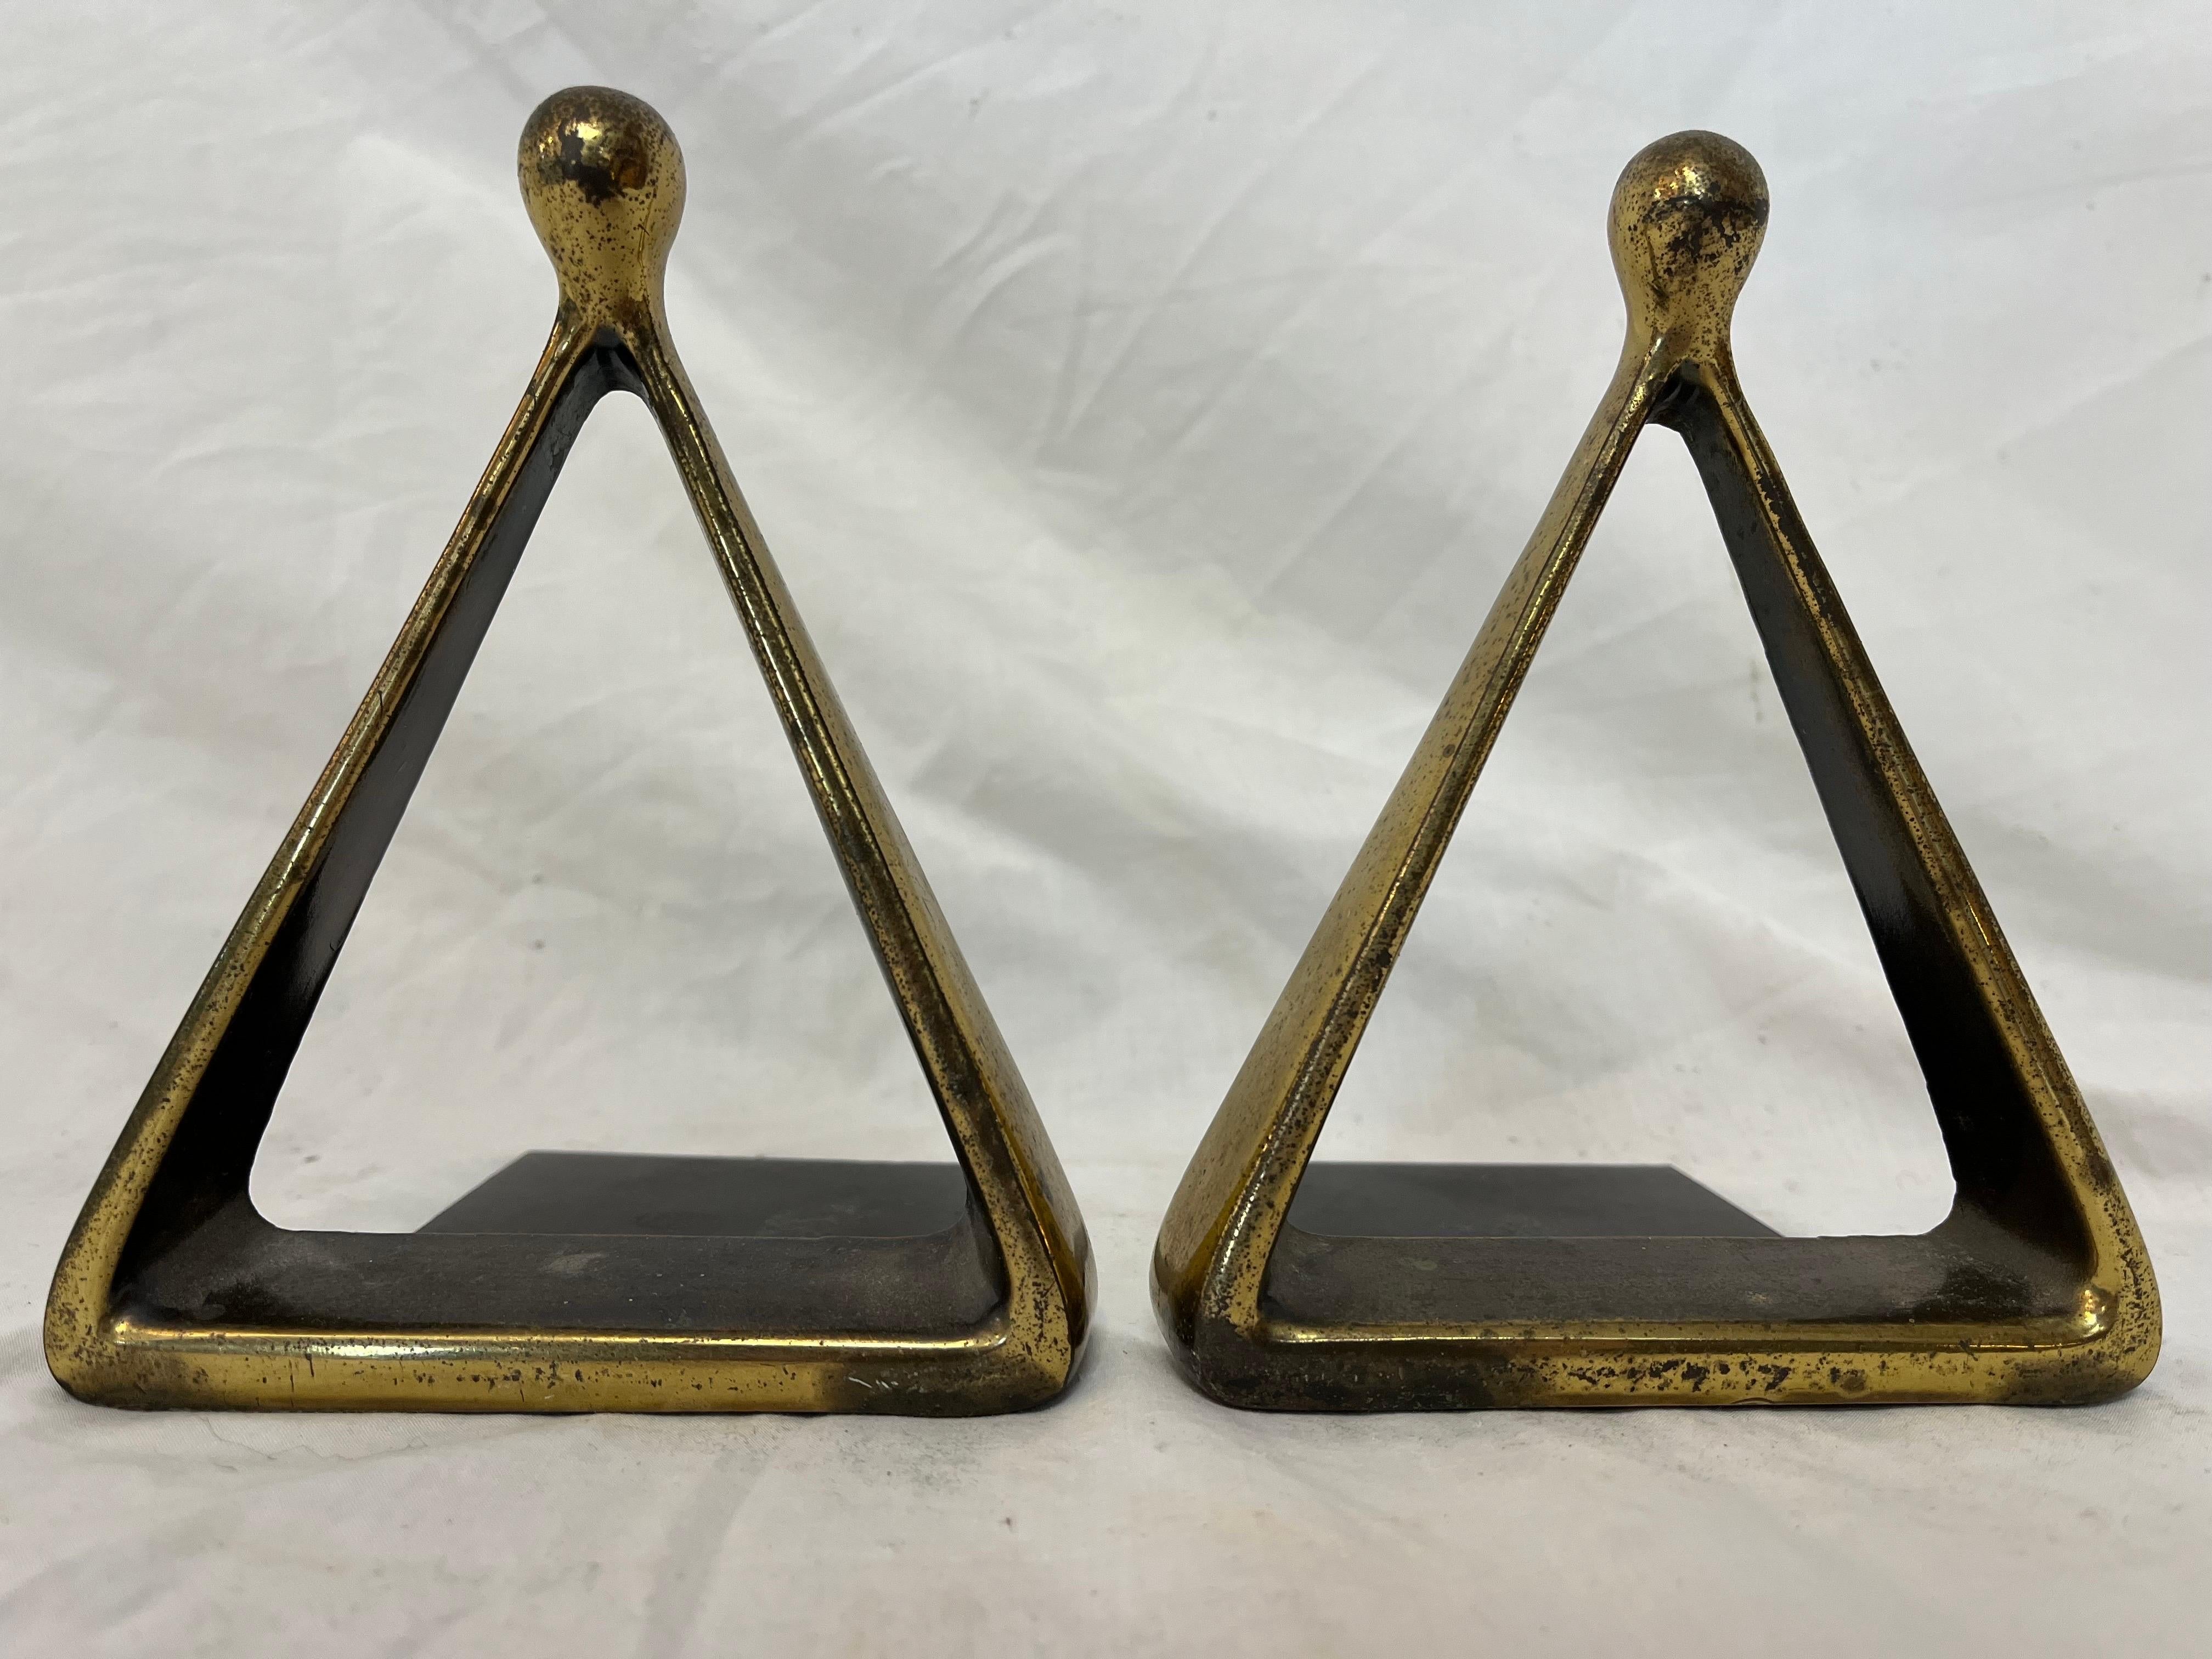 A chic and iconic pair of triangle or stirrup bookends by Ben Seibel. These Classic examples of Mid-Century Modern design are well loved with patination and oxidation to the surface. Embossed mark from Jenfredware, felt bottoms and paper labels all